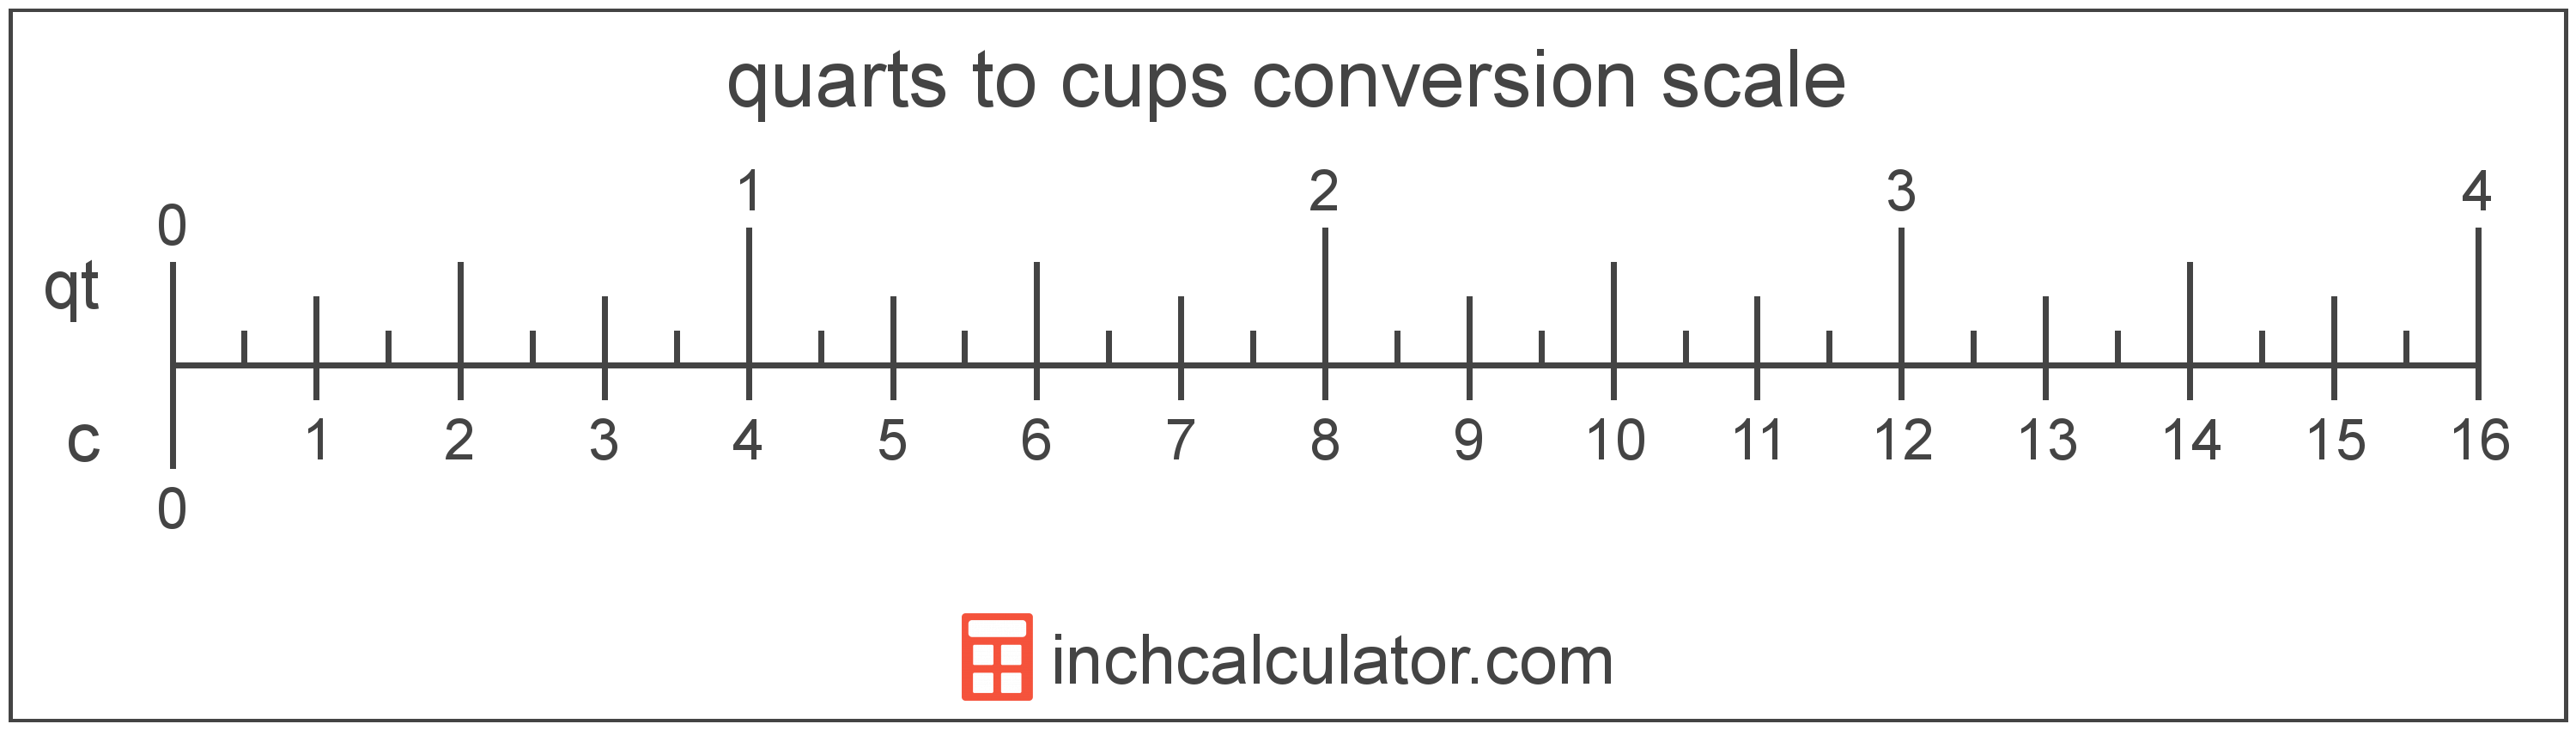 conversion scale showing quarts and equivalent cups volume values